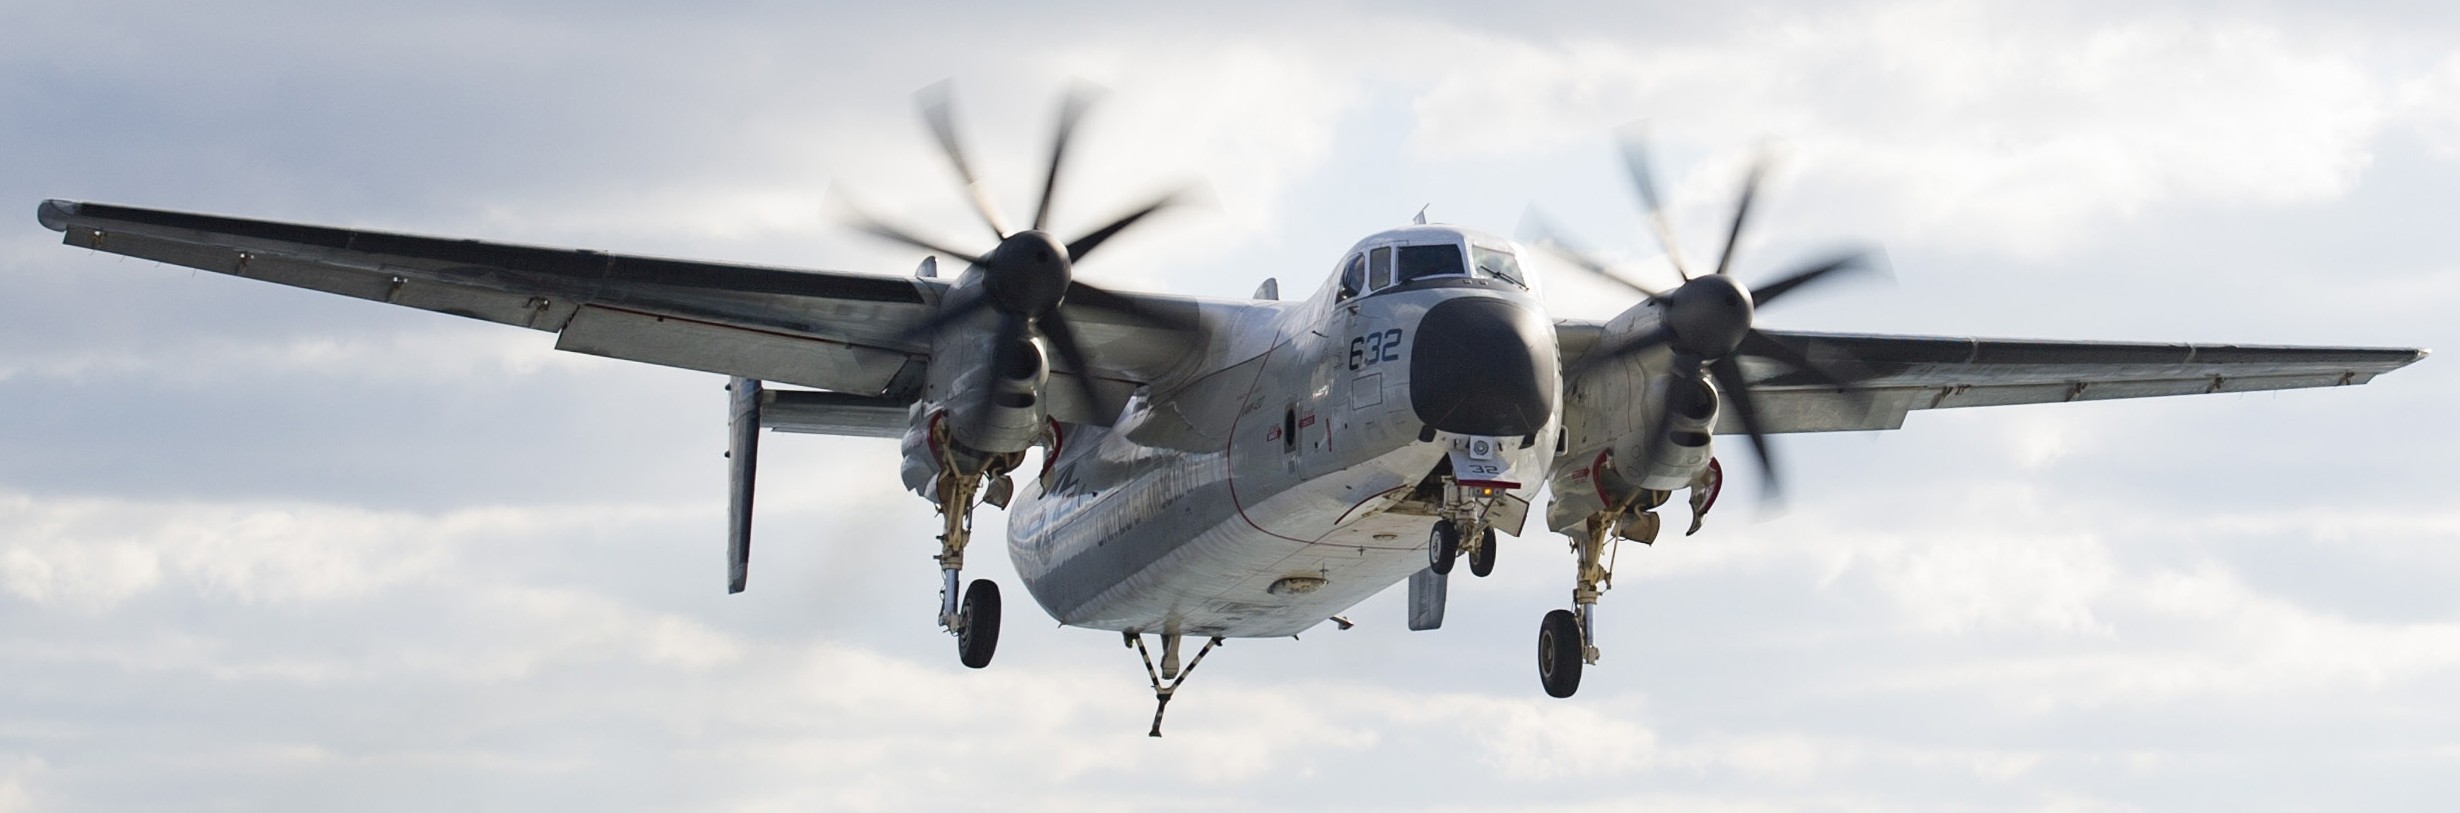 vaw-120 greyhawks carrier airborne early warning squadron c-2a greyhound replacement uss harry s. truman cvn-75 71